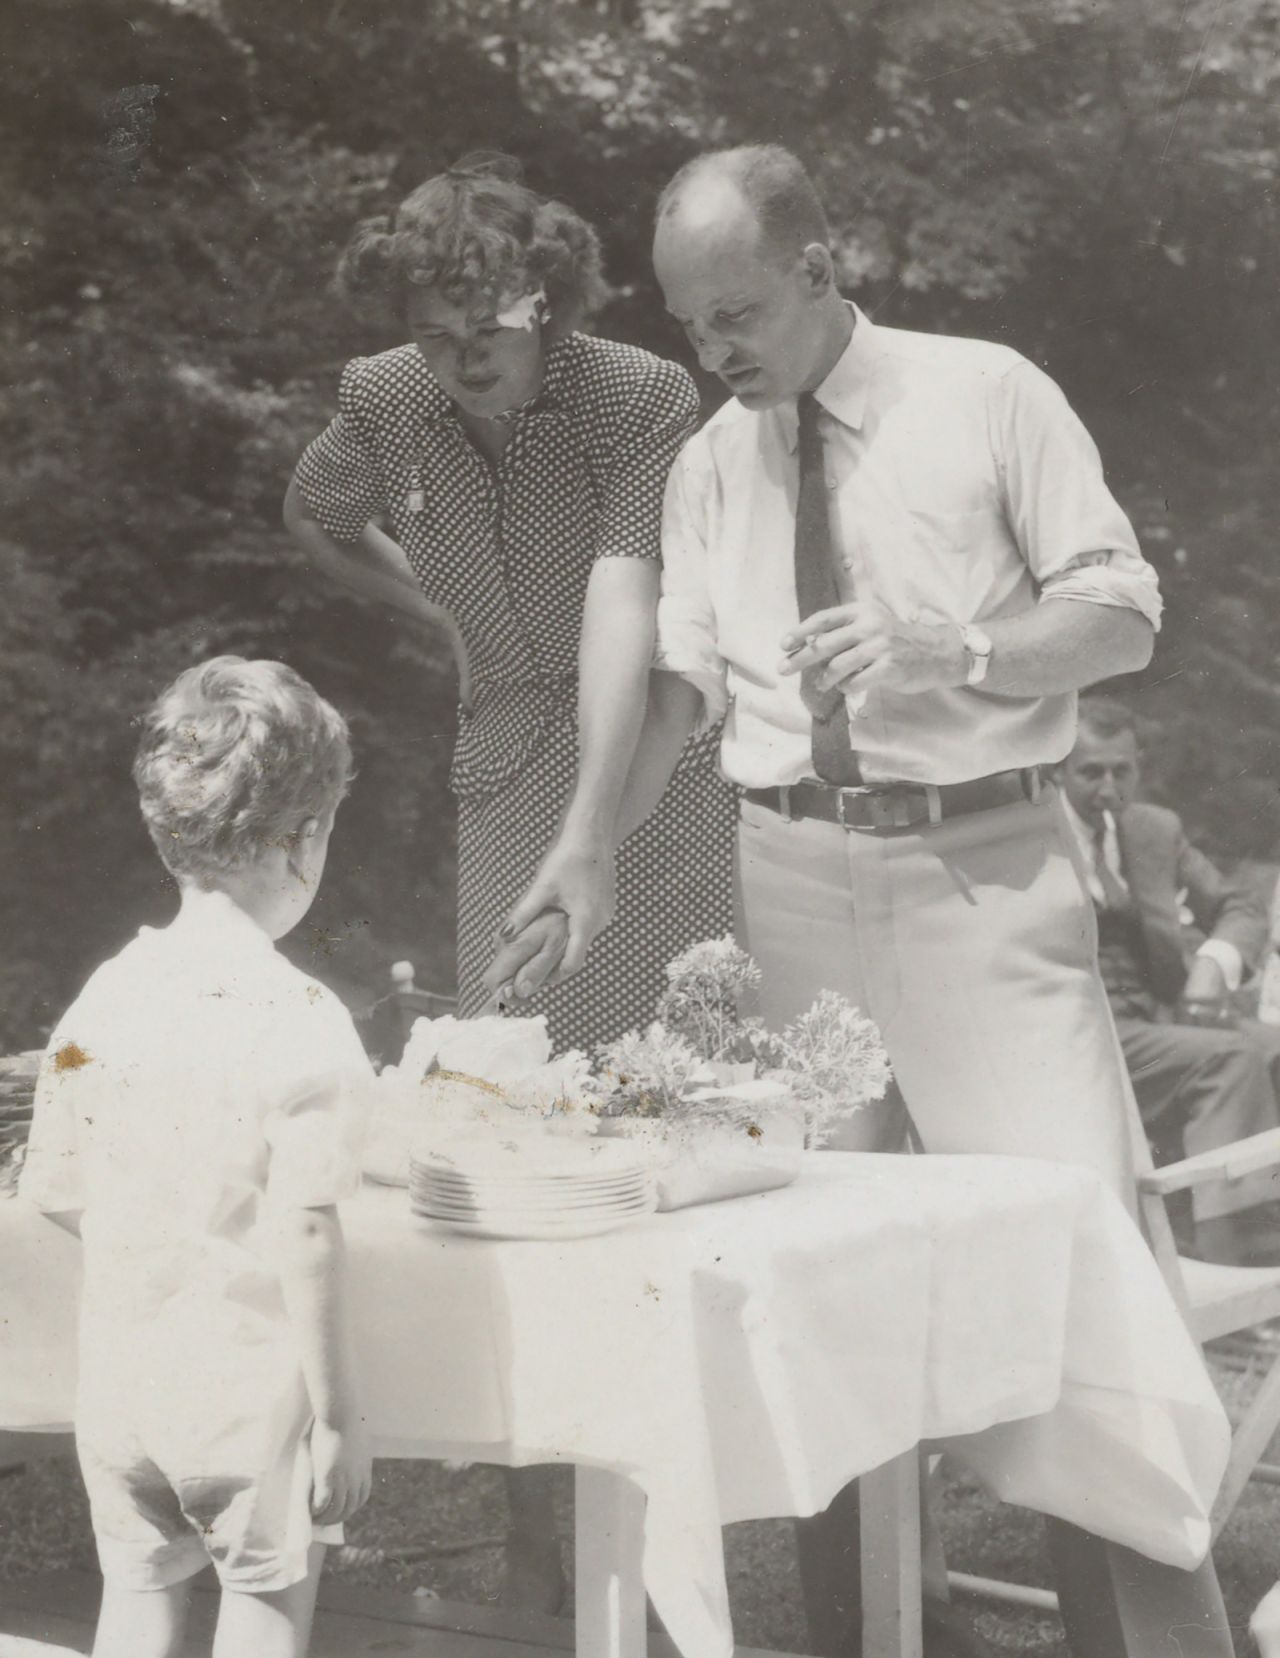 Child with her husband, Paul, on their wedding day in Lumberville, Pennsylvania, in 1946. The couple met in what is now Sri Lanka while serving for the Office of Strategic Services after World War II.